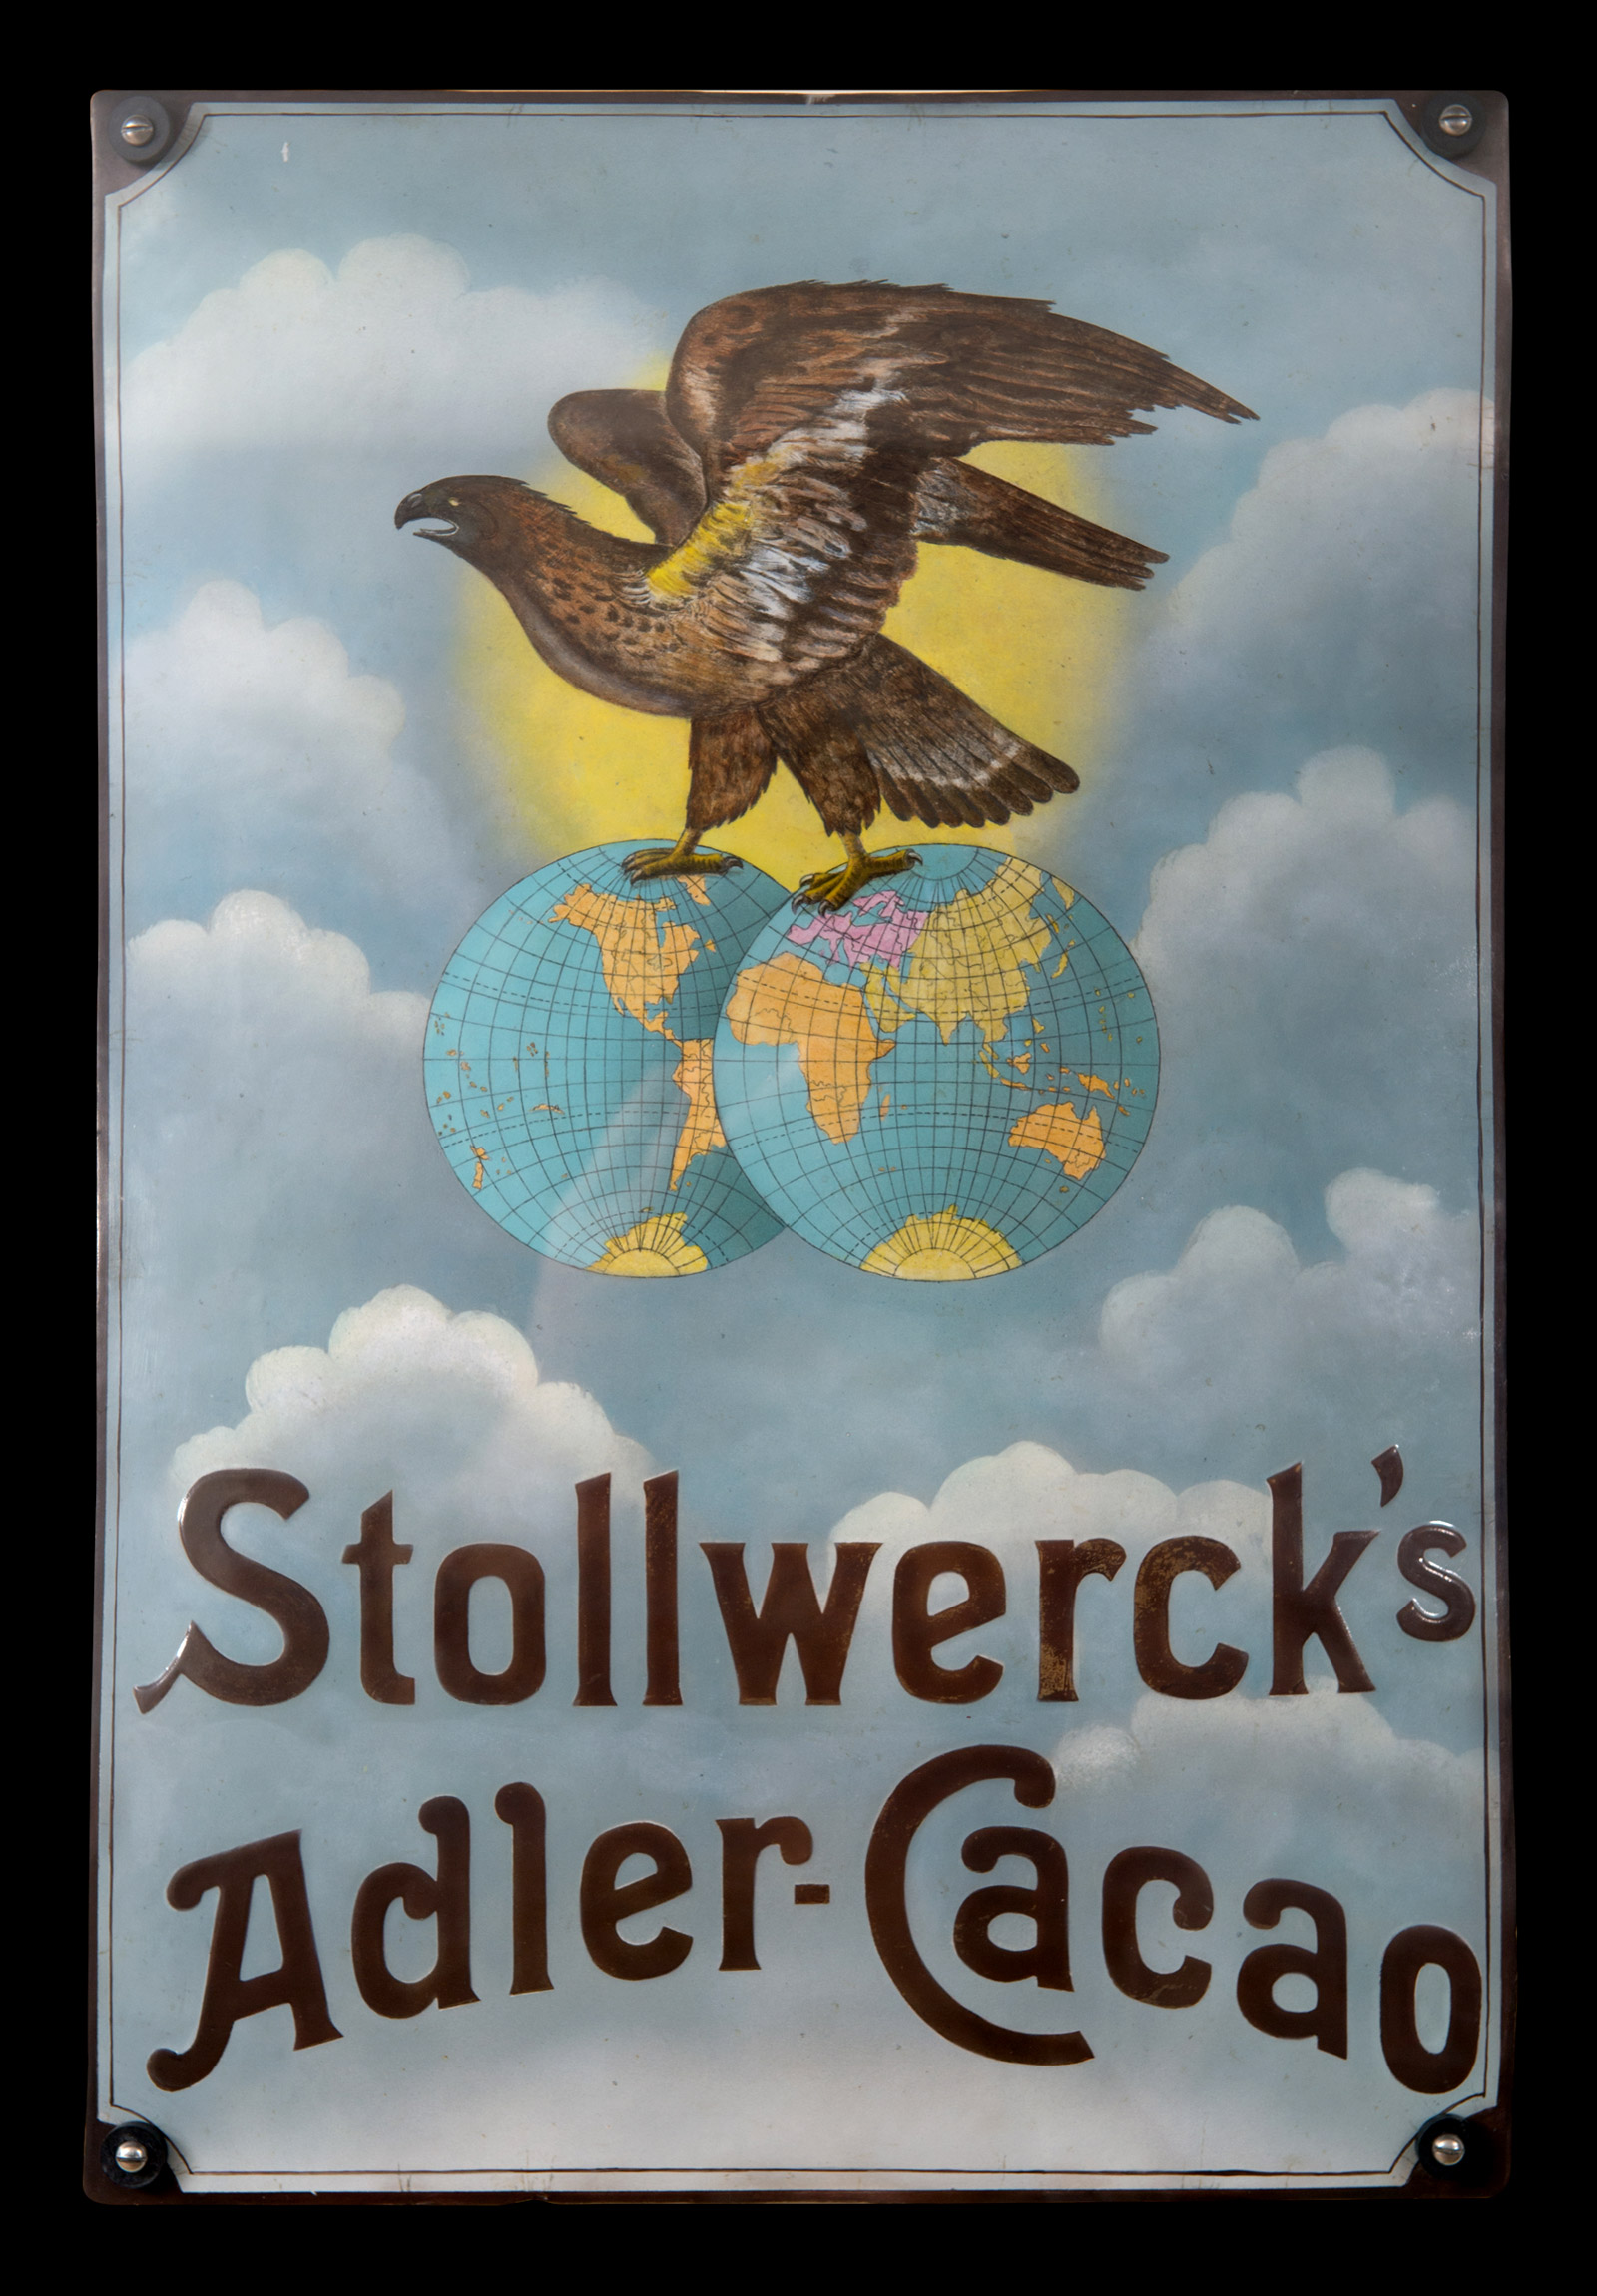 A photograph showing an enamel sign used in 1903 by the Stollwerck chocolate company.